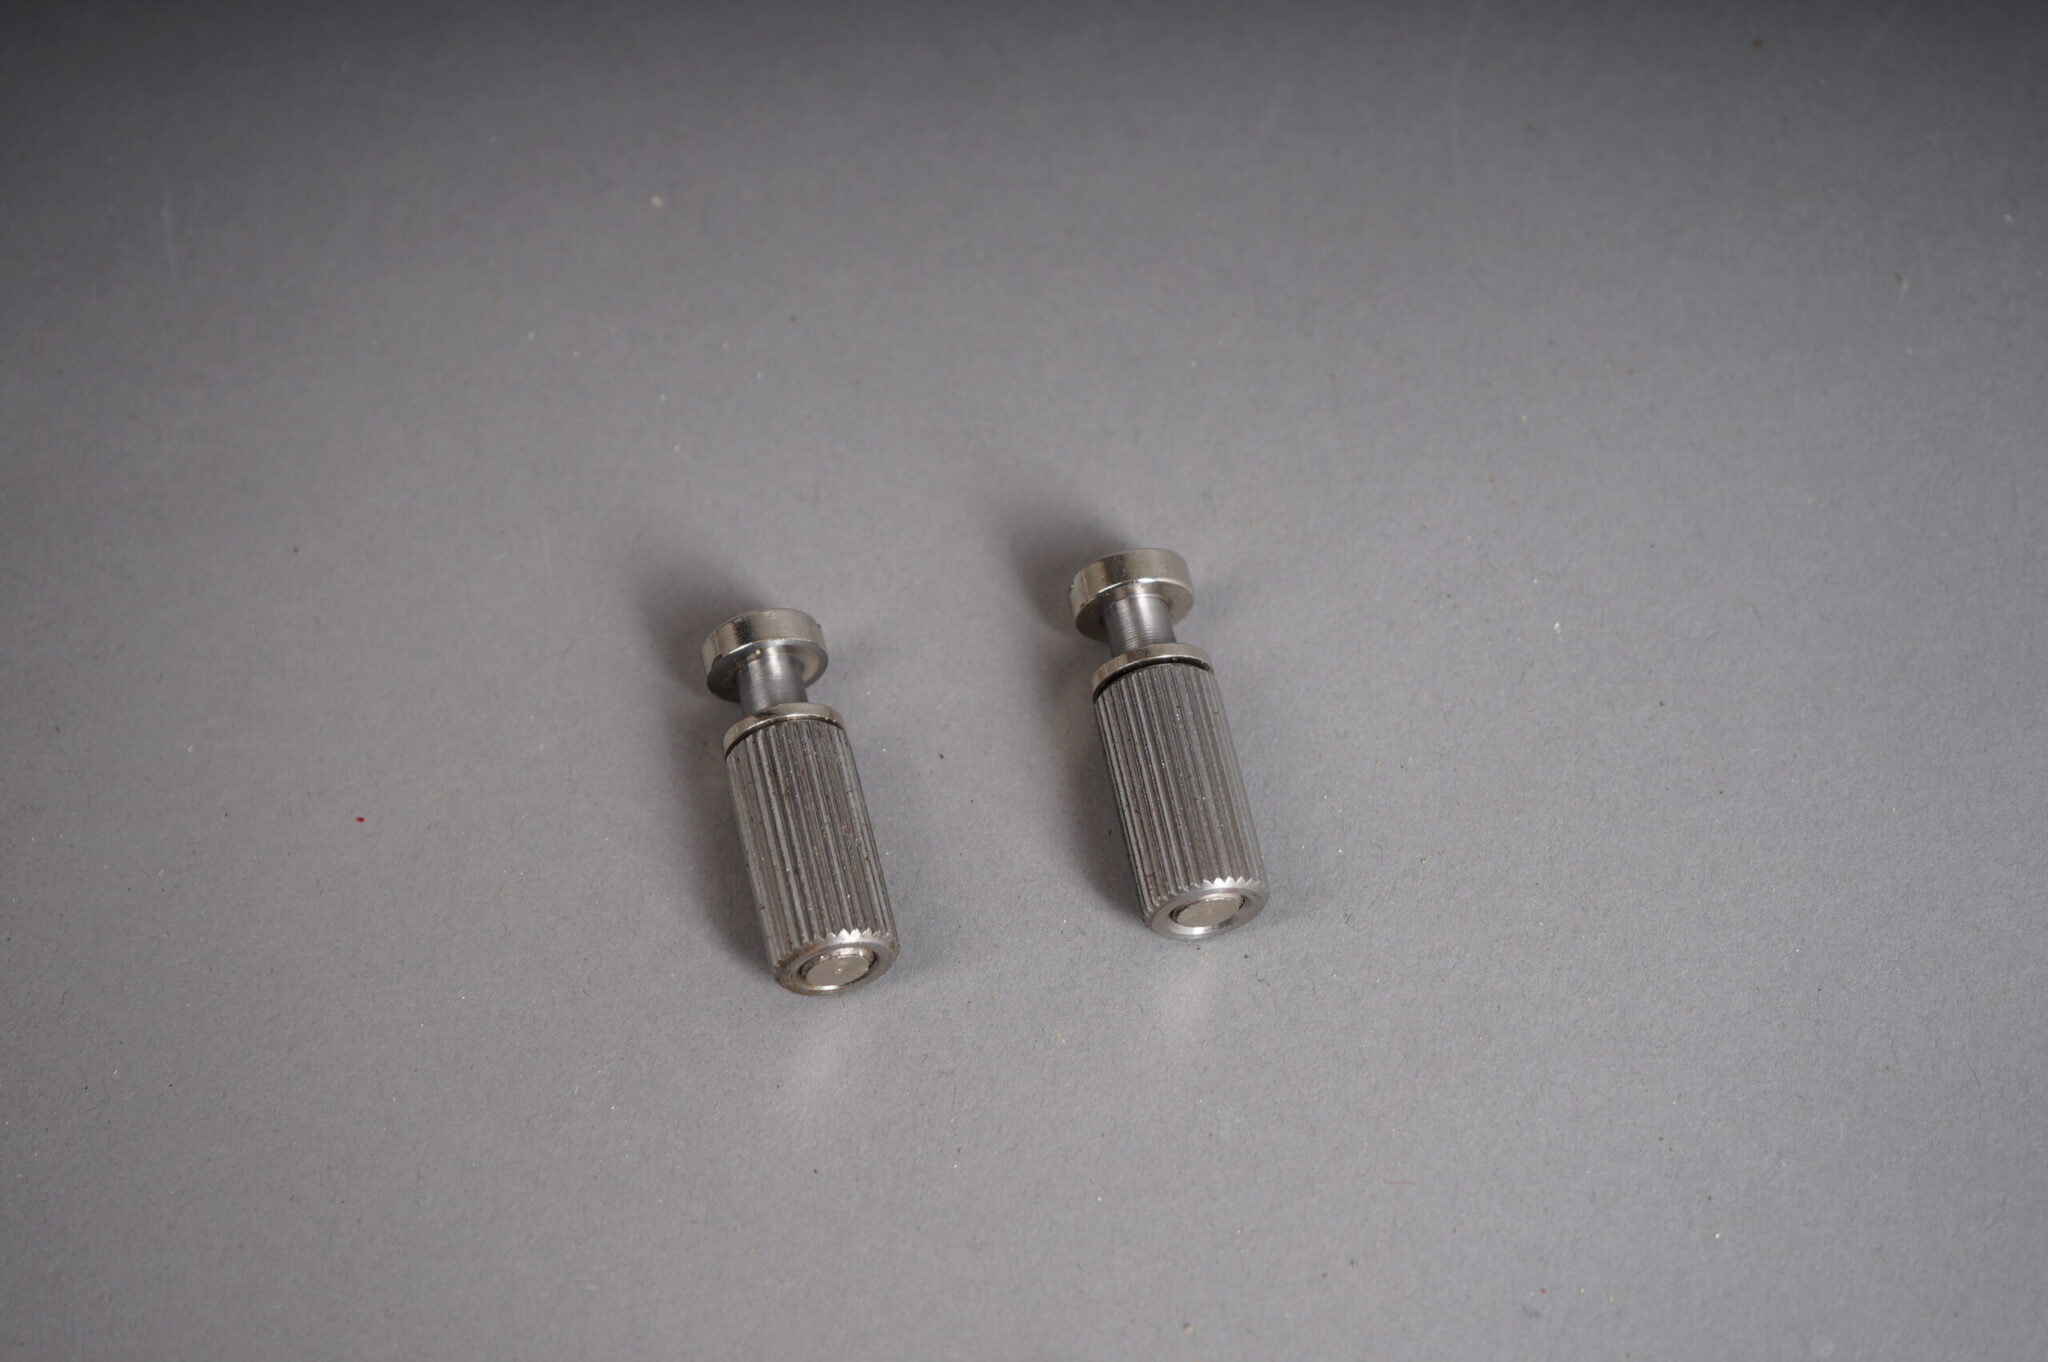 https://guitarpoint.de/app/uploads/products/pigtail-music-50s-tailpiece-studs-and-bushings-vintage-length-1/Pigtail-stud-bushing-3-scaled-2048x1362.jpg